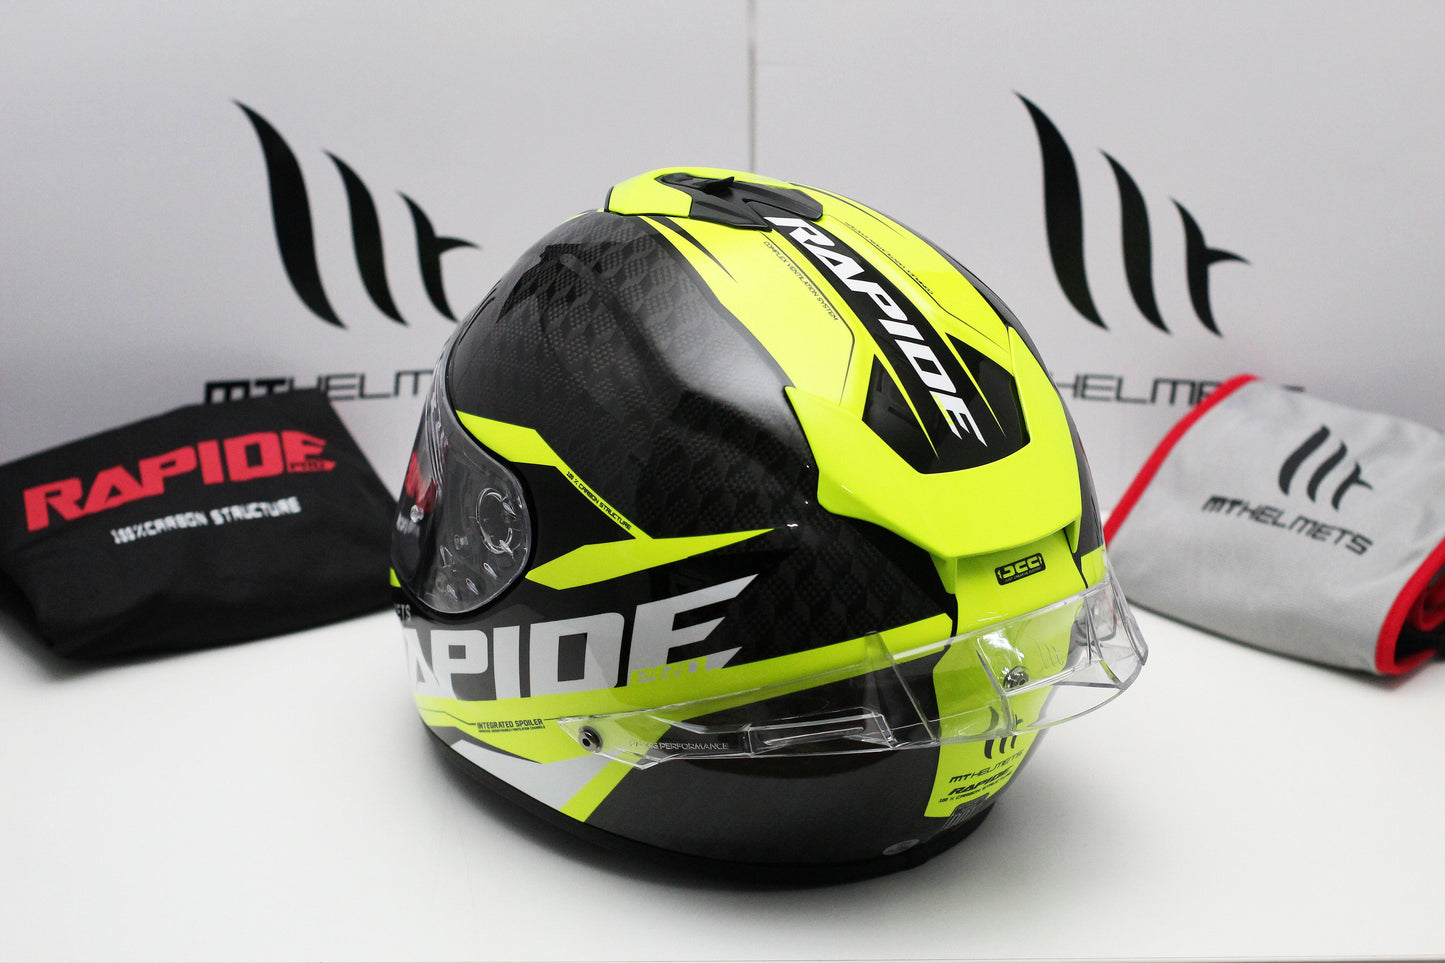 MT Rapide Pro Carbon (Gloss Fluor Yellow) - Durian Bikers